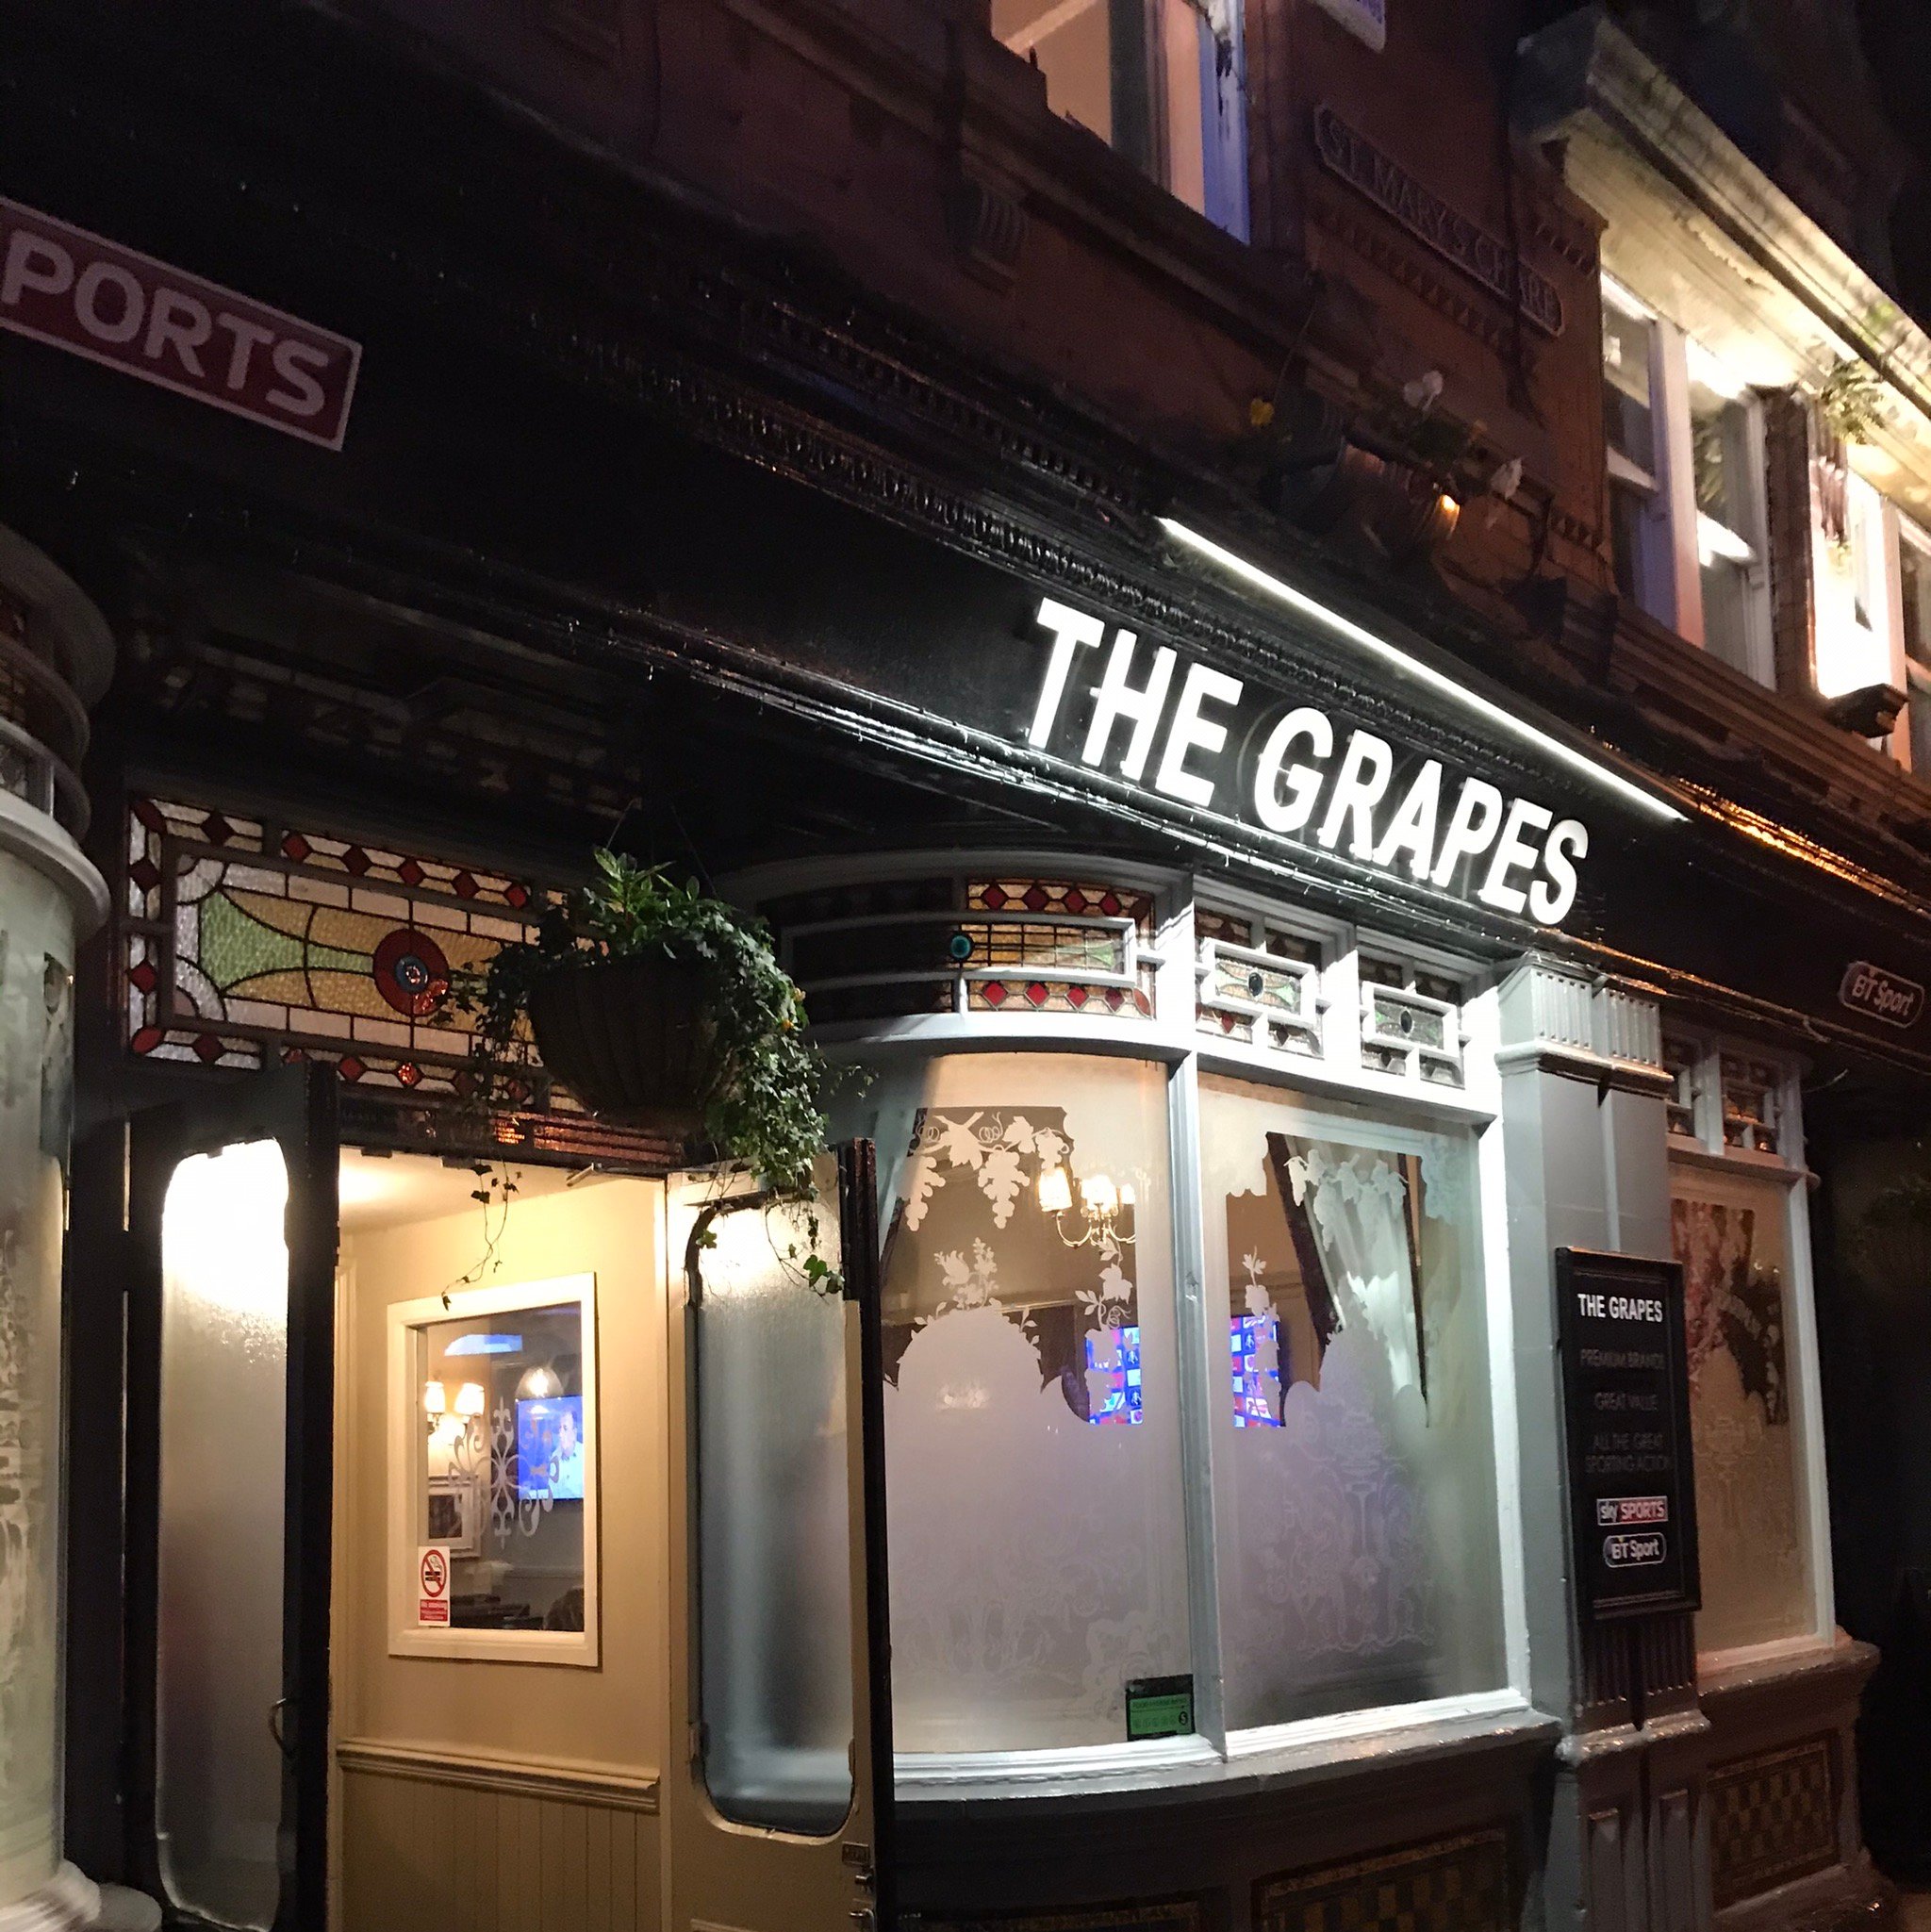 The Grapes Hotel